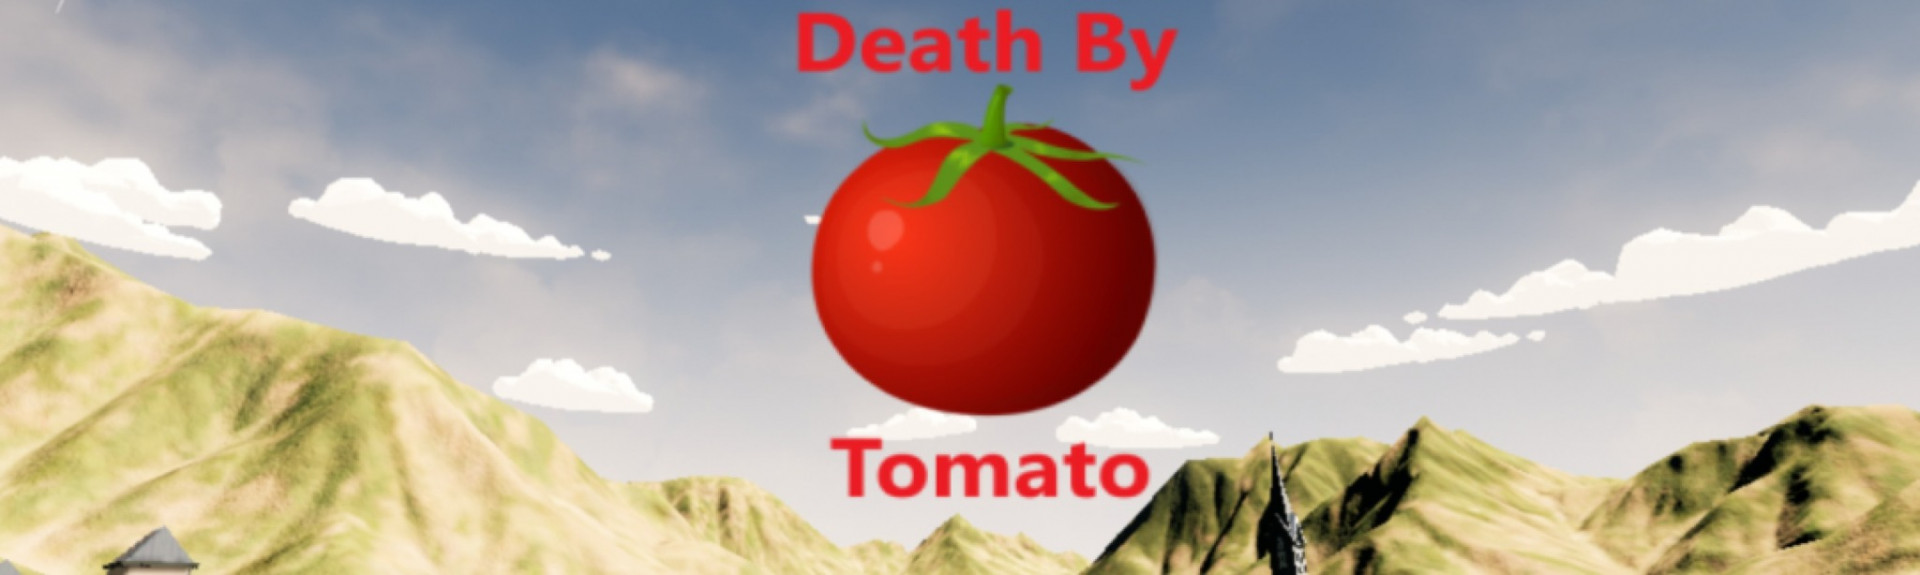 Death By Tomato